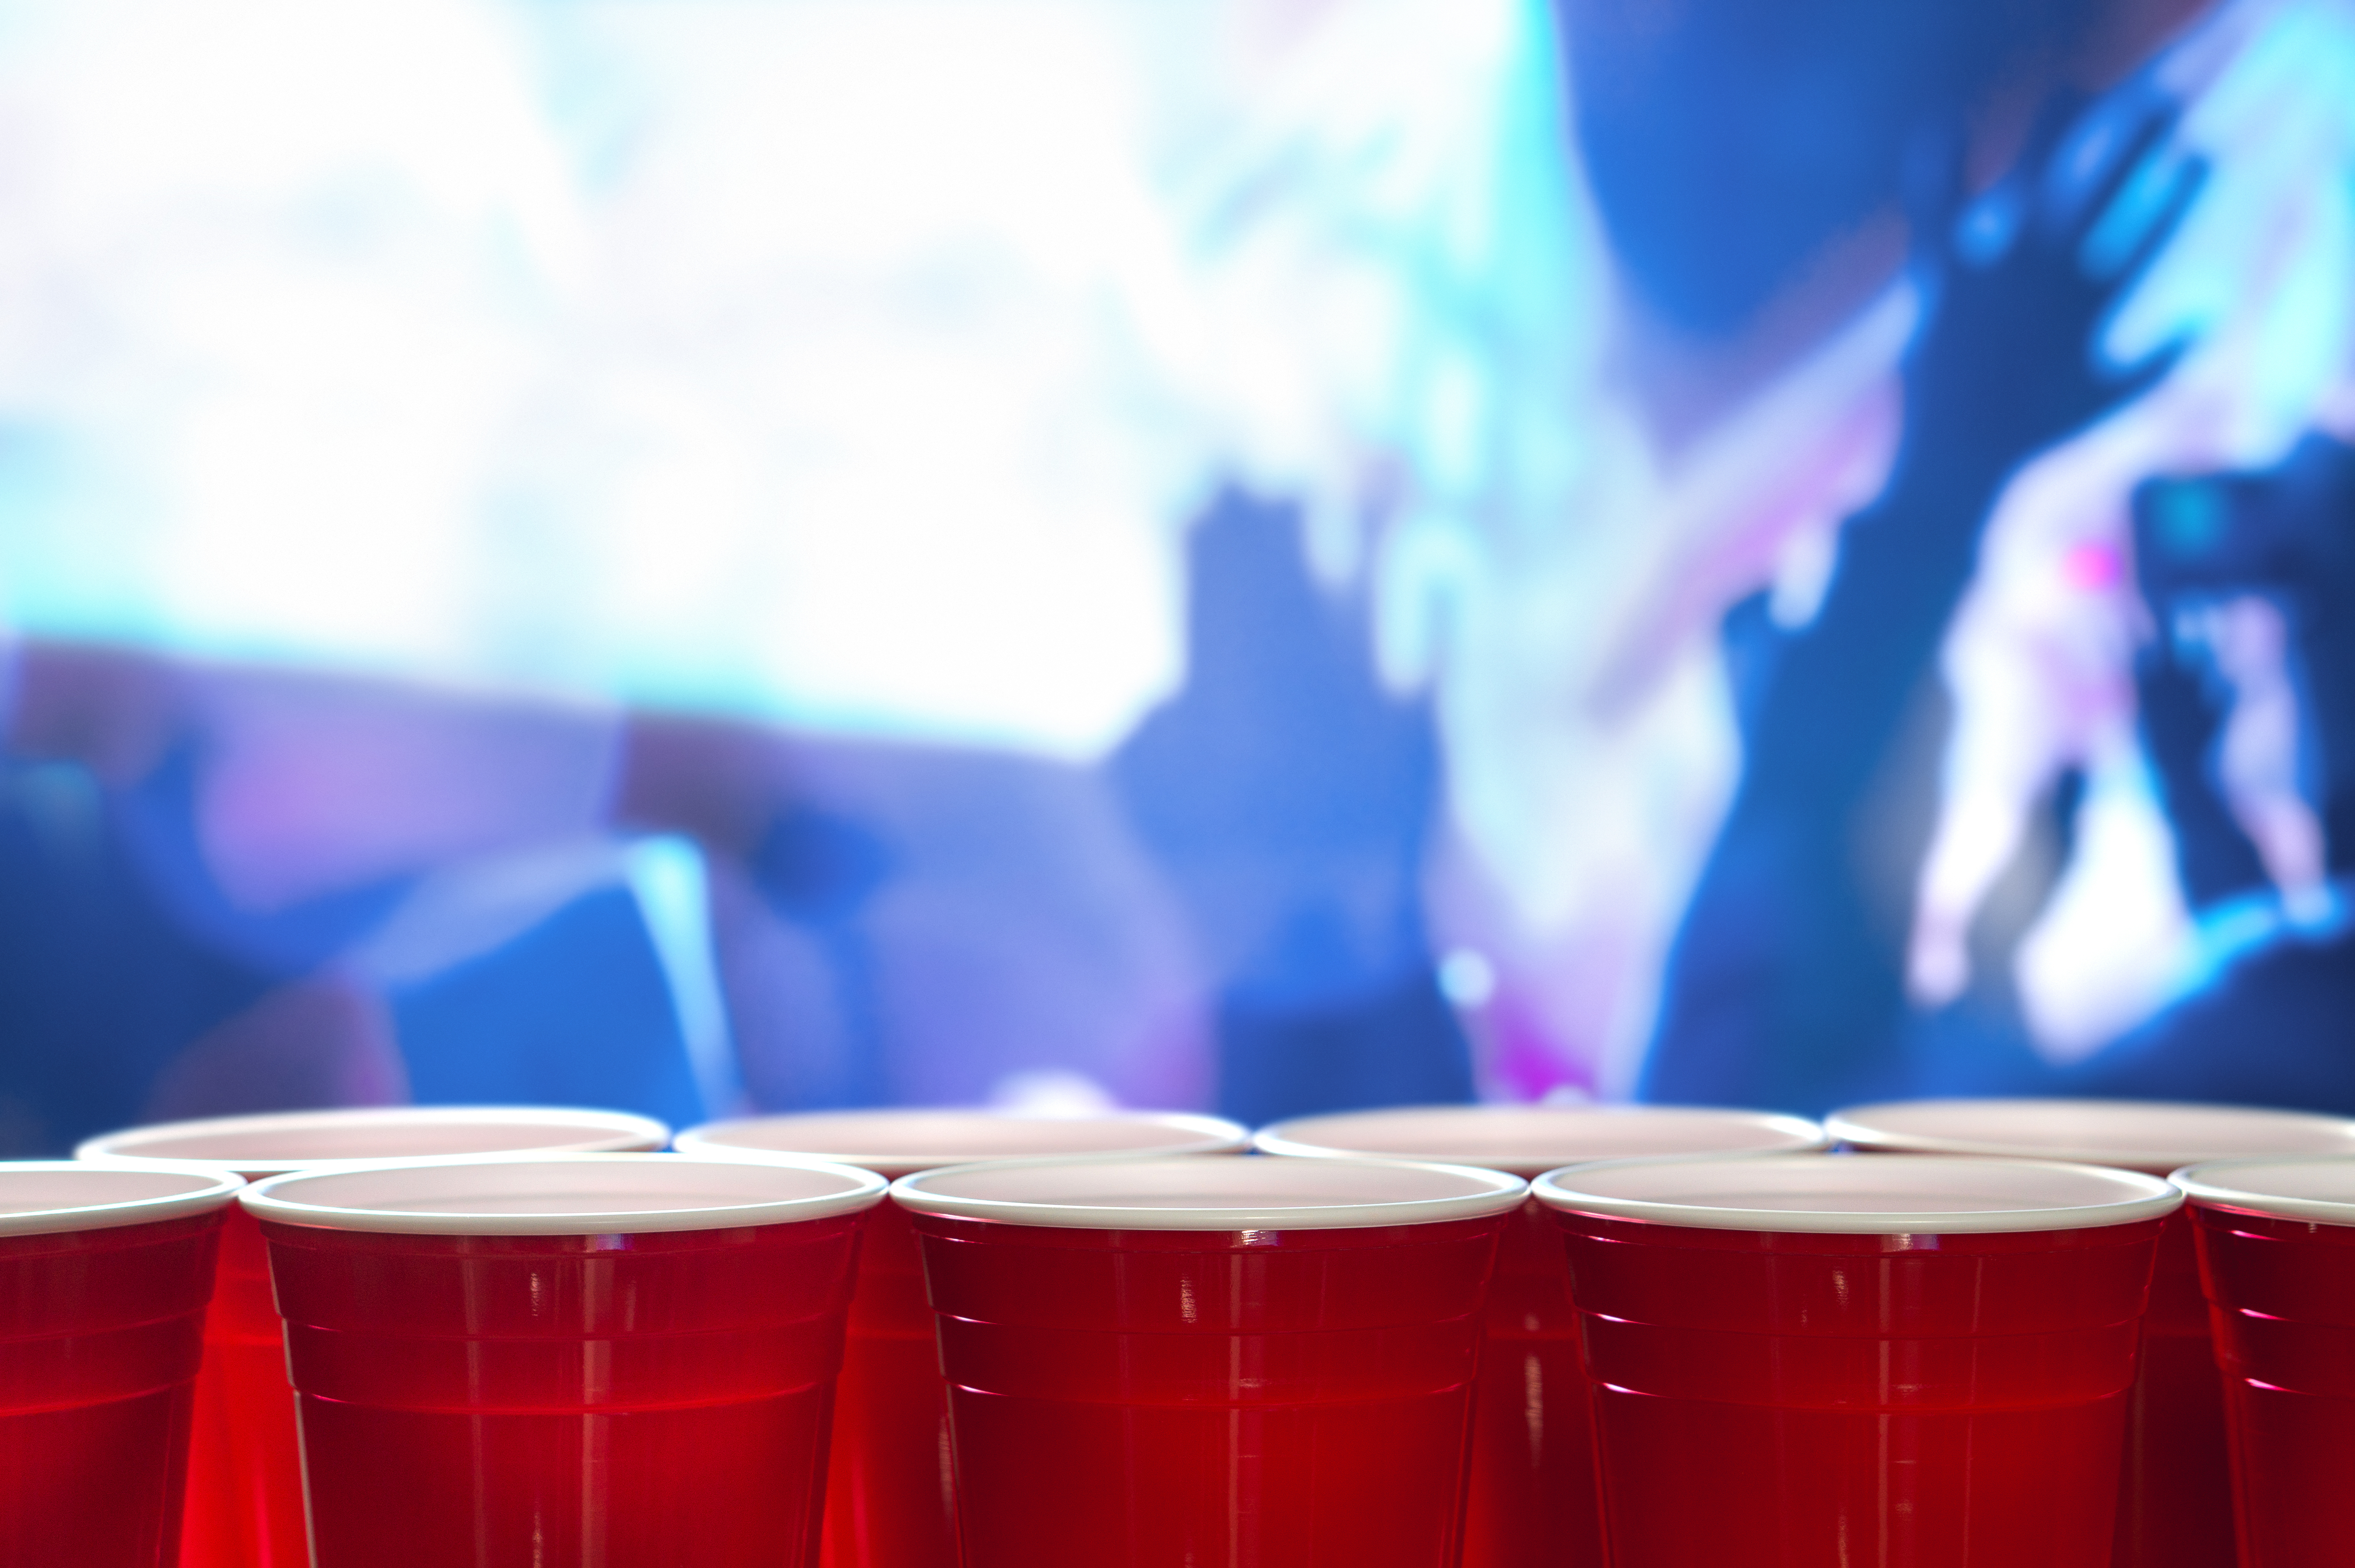 A row of red plastic cups at a college party.